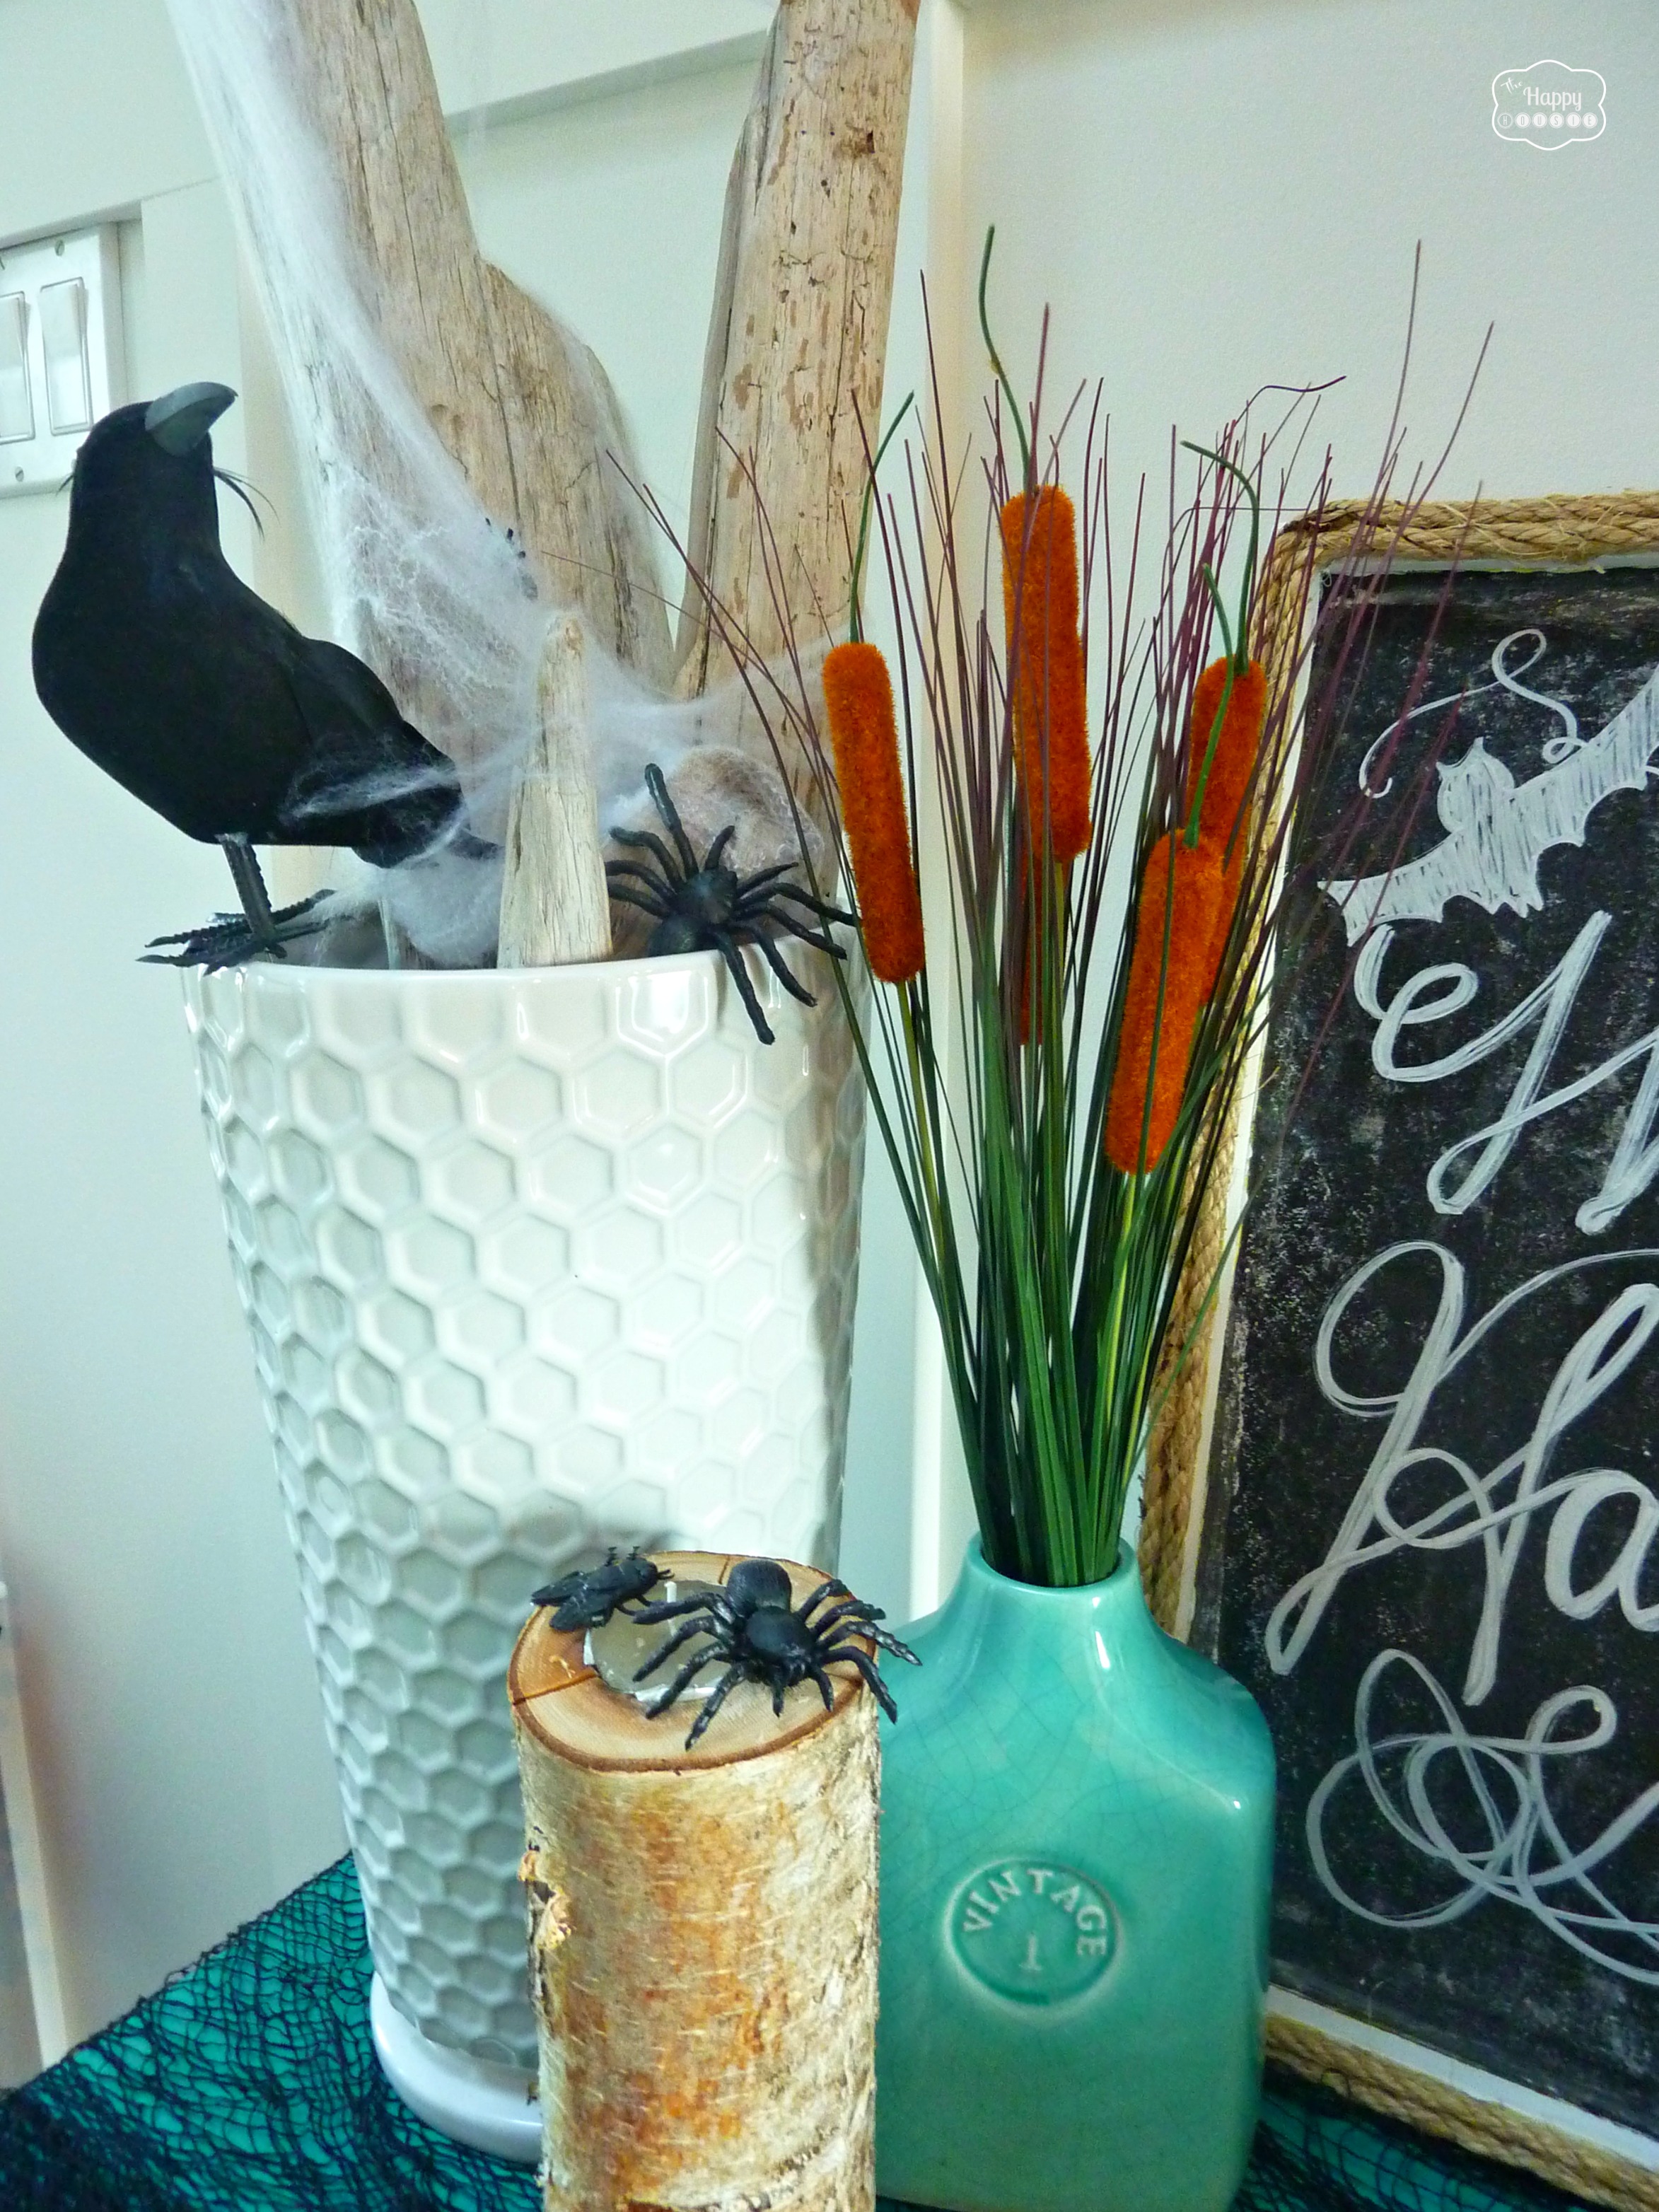 A black crow in a white vase and a blue vase.